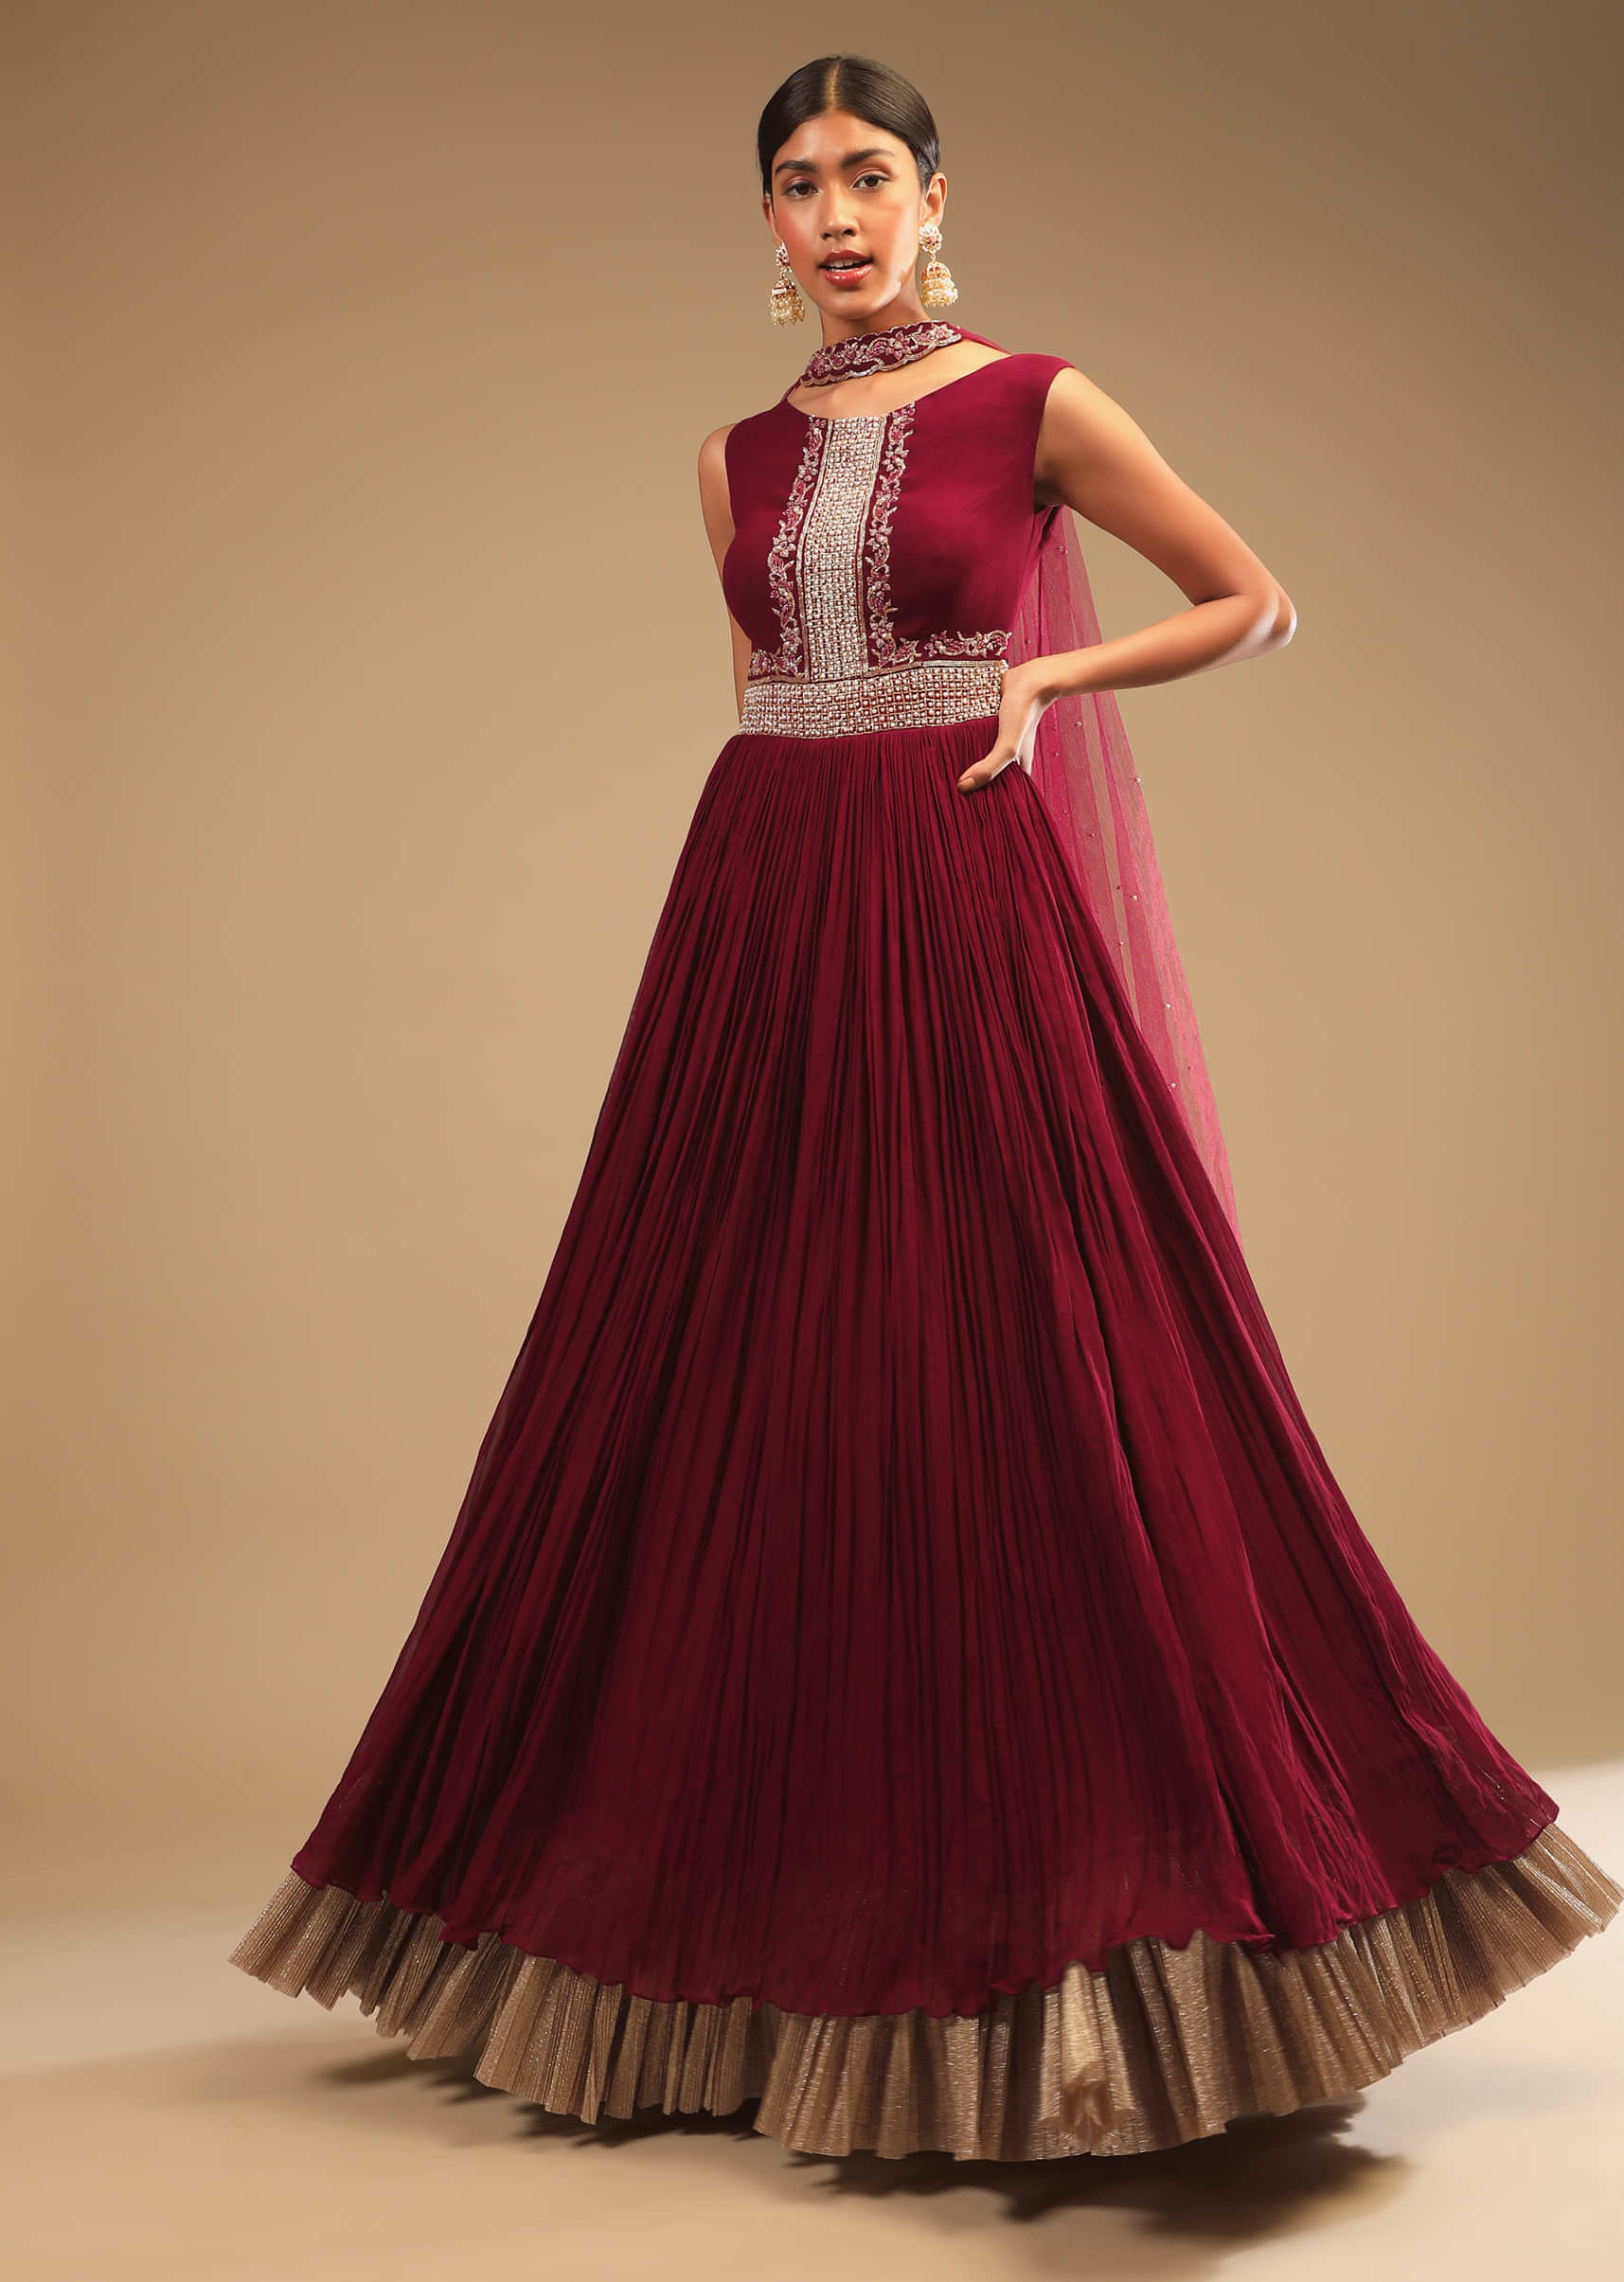 Maroon Anarkali Suit In Georgette With Cut Dana And Moti Embroidered Bodice And Metallic Frill On The Hemline  